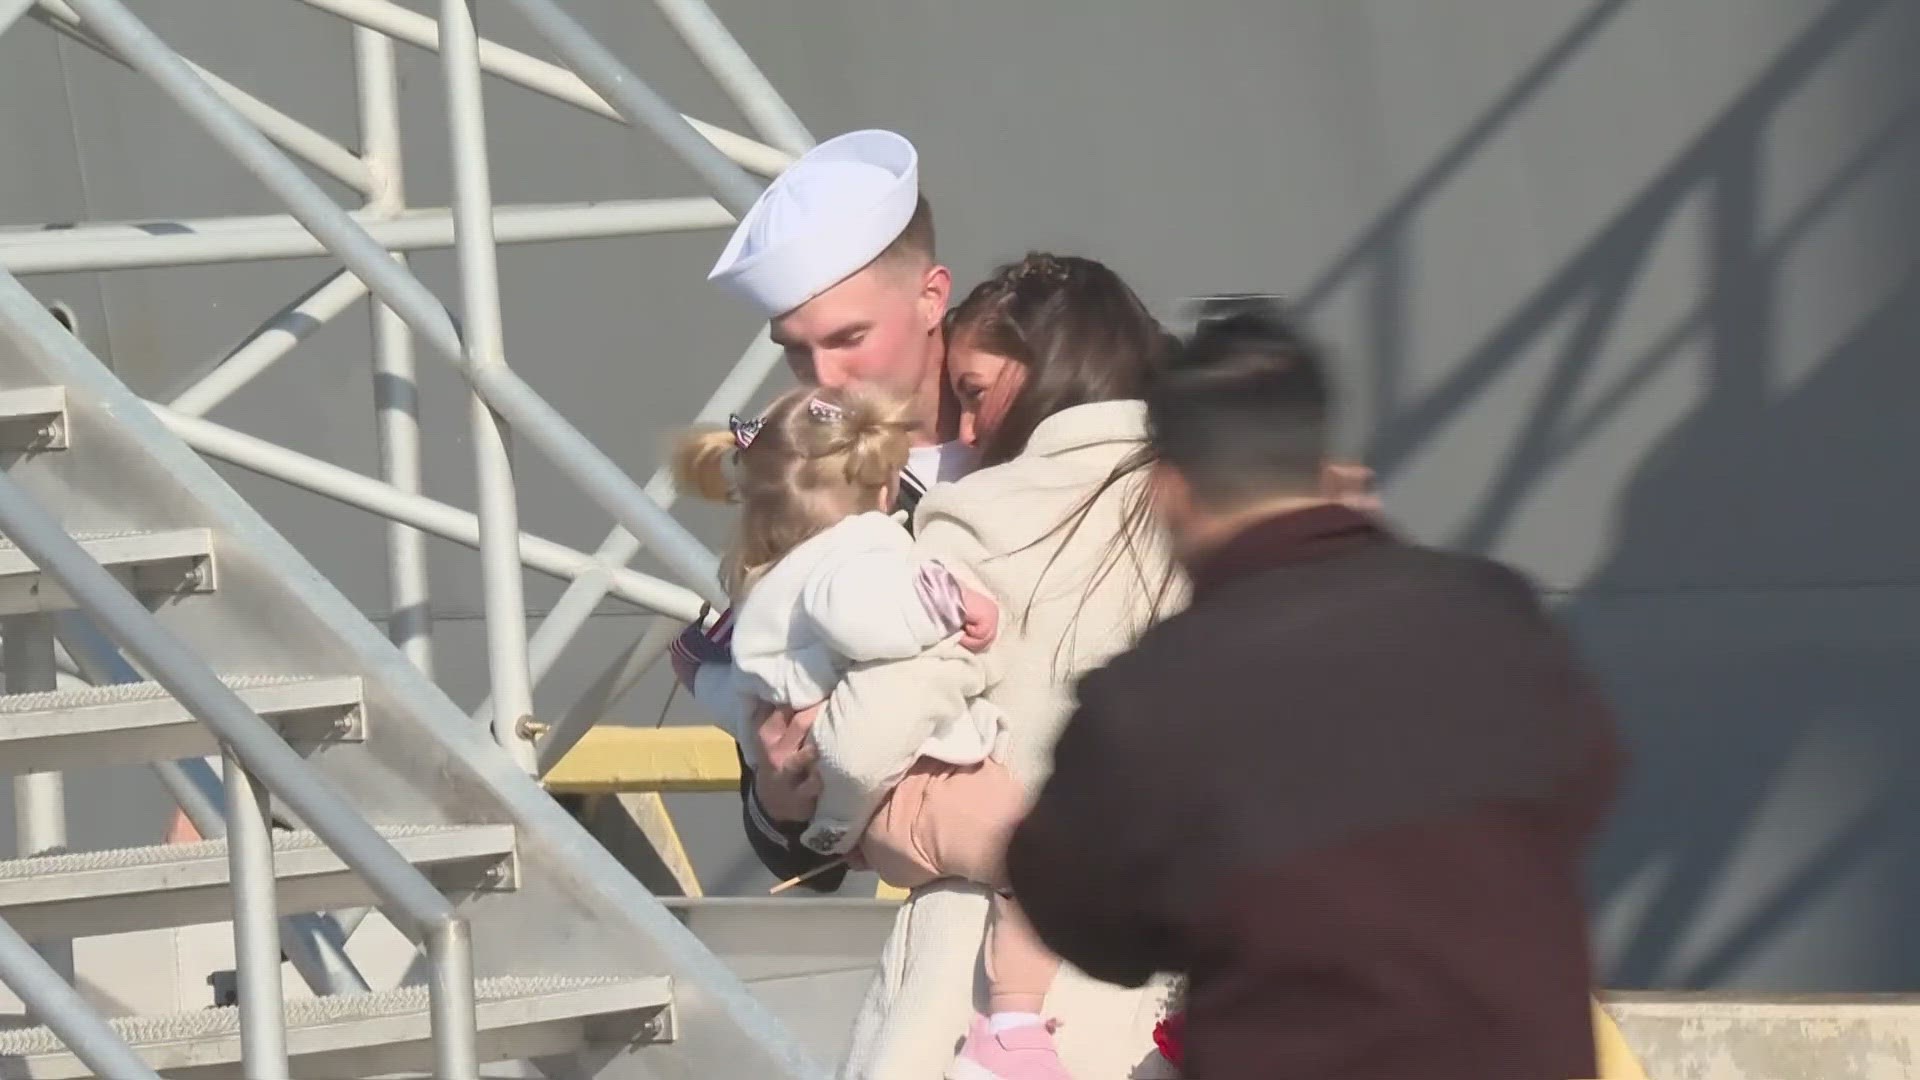 Crowds welcomed hundreds of sailors to Naval Station Mayport, the first of two ships returning from overseas deployments.